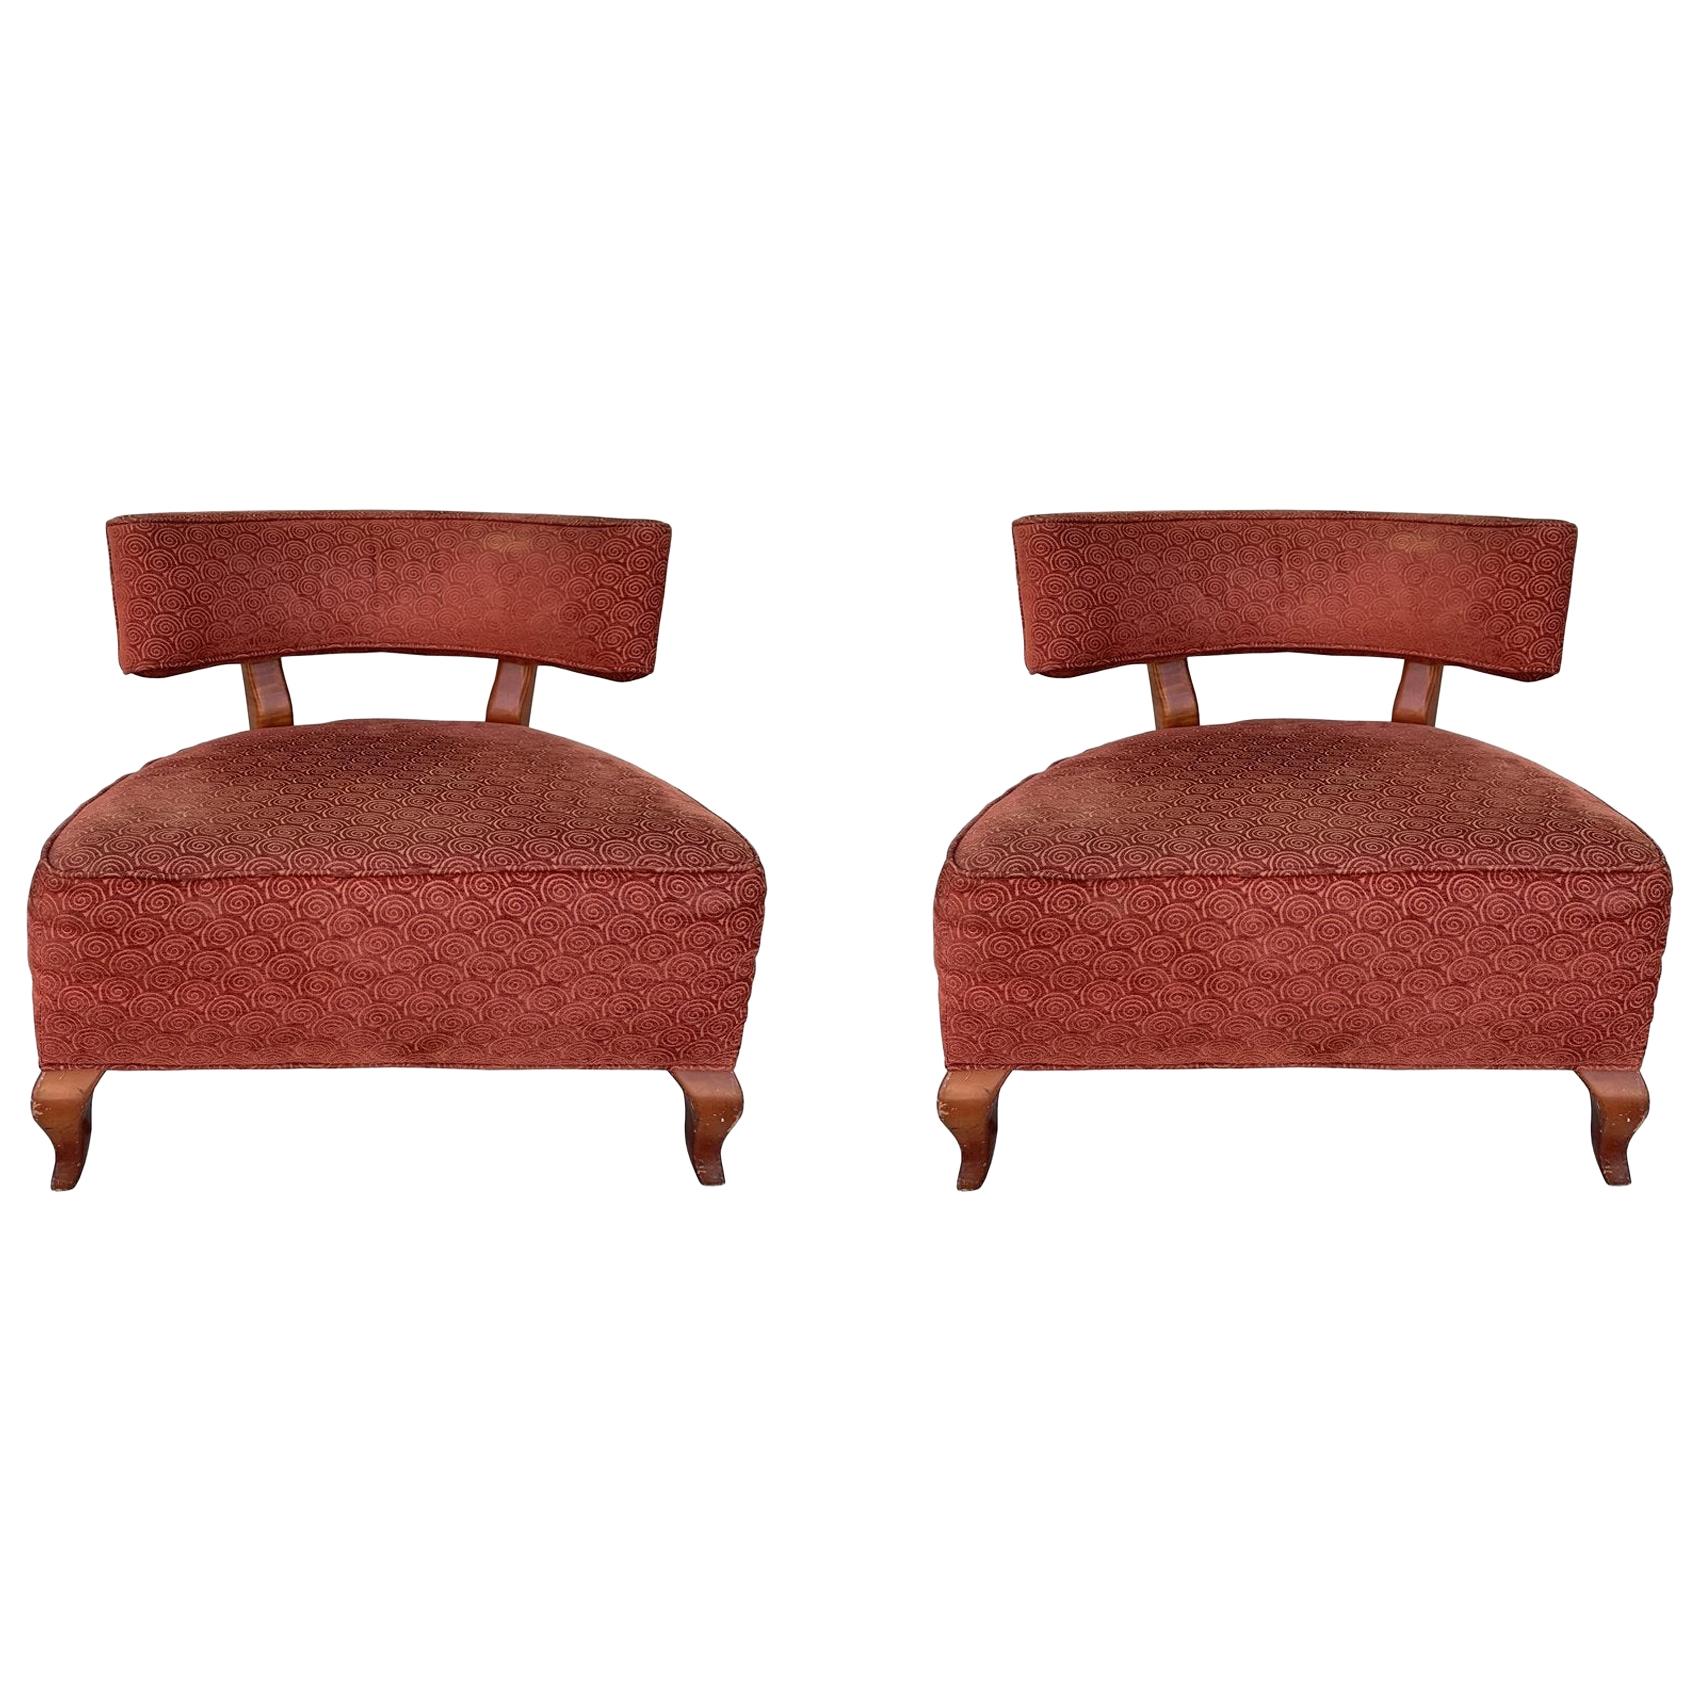 Pair of Slipper Chairs by Thayer Coggin